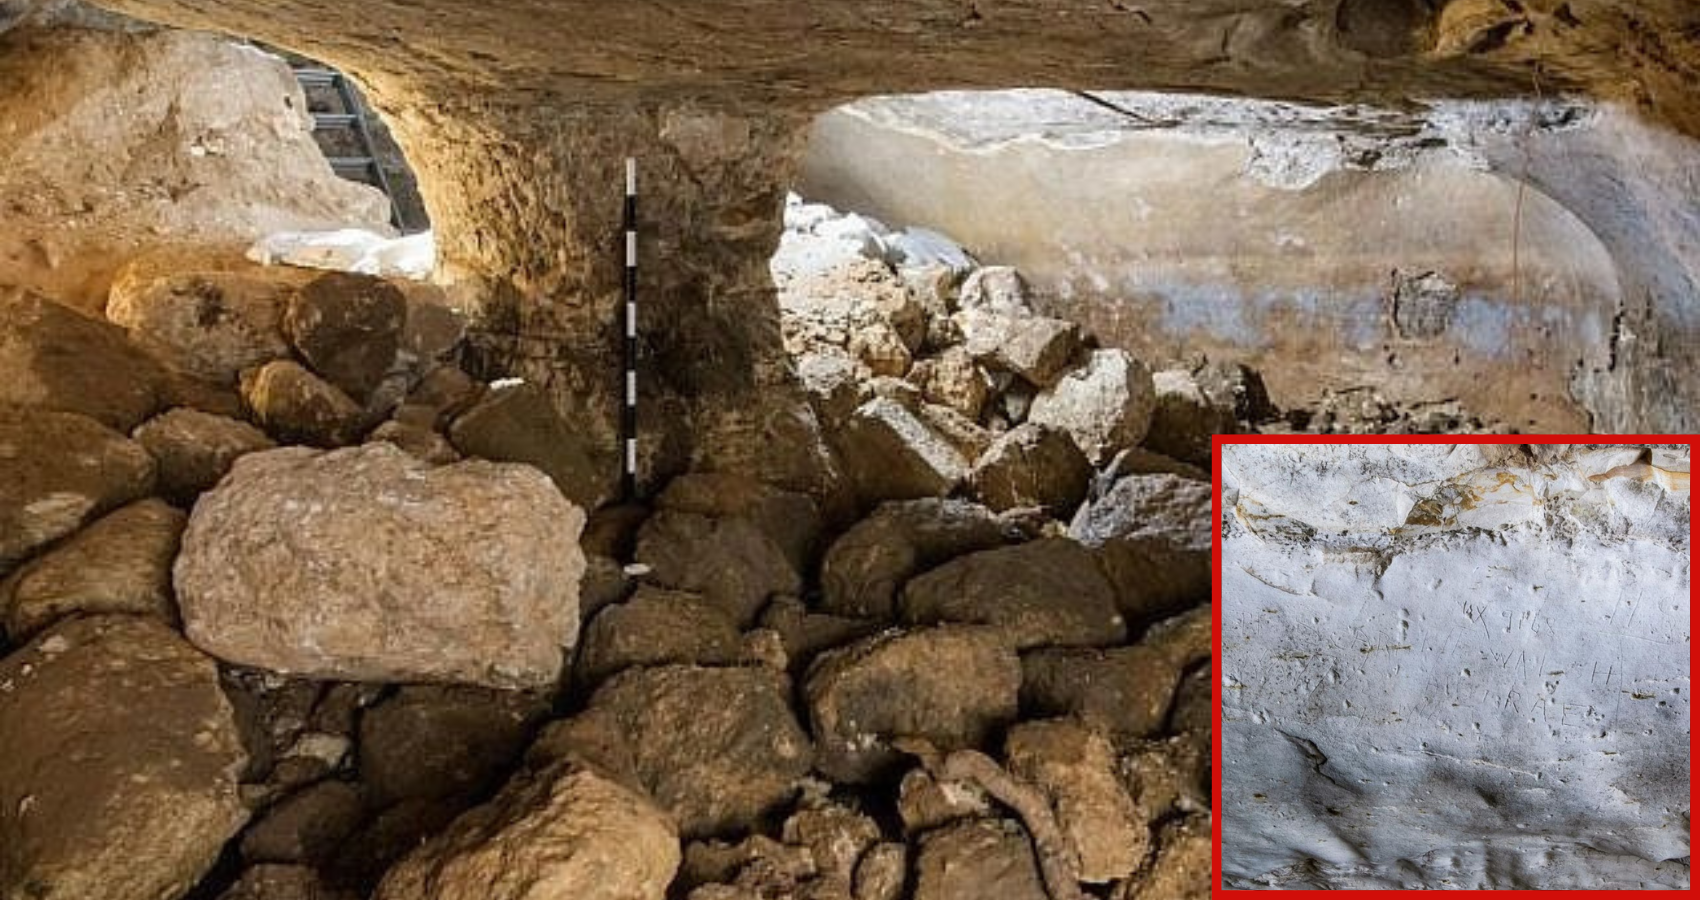 Ancient bath and Aussie carvings uncovered at archaeology site